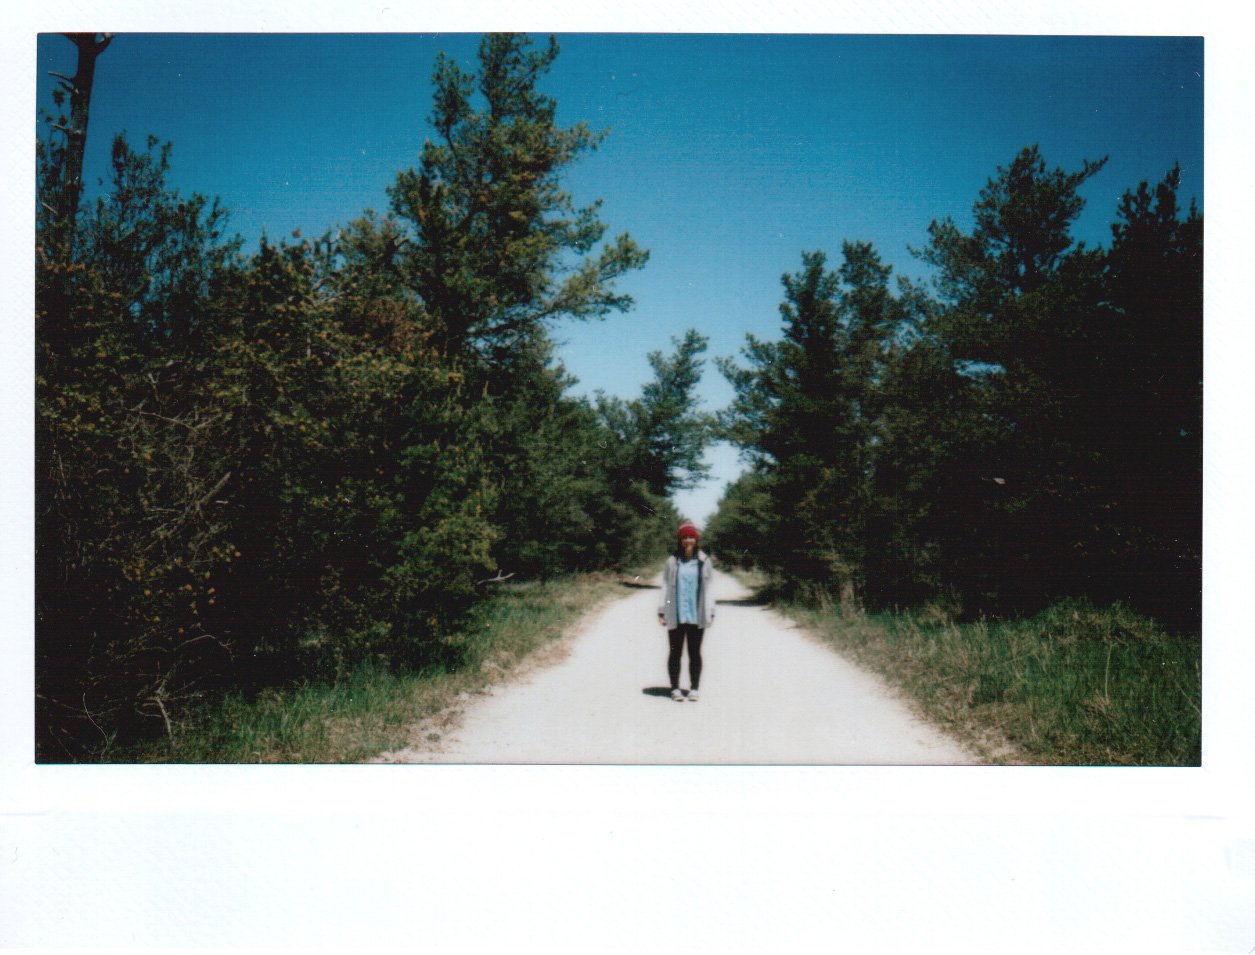 instax travel photography at luddington state park in michigan